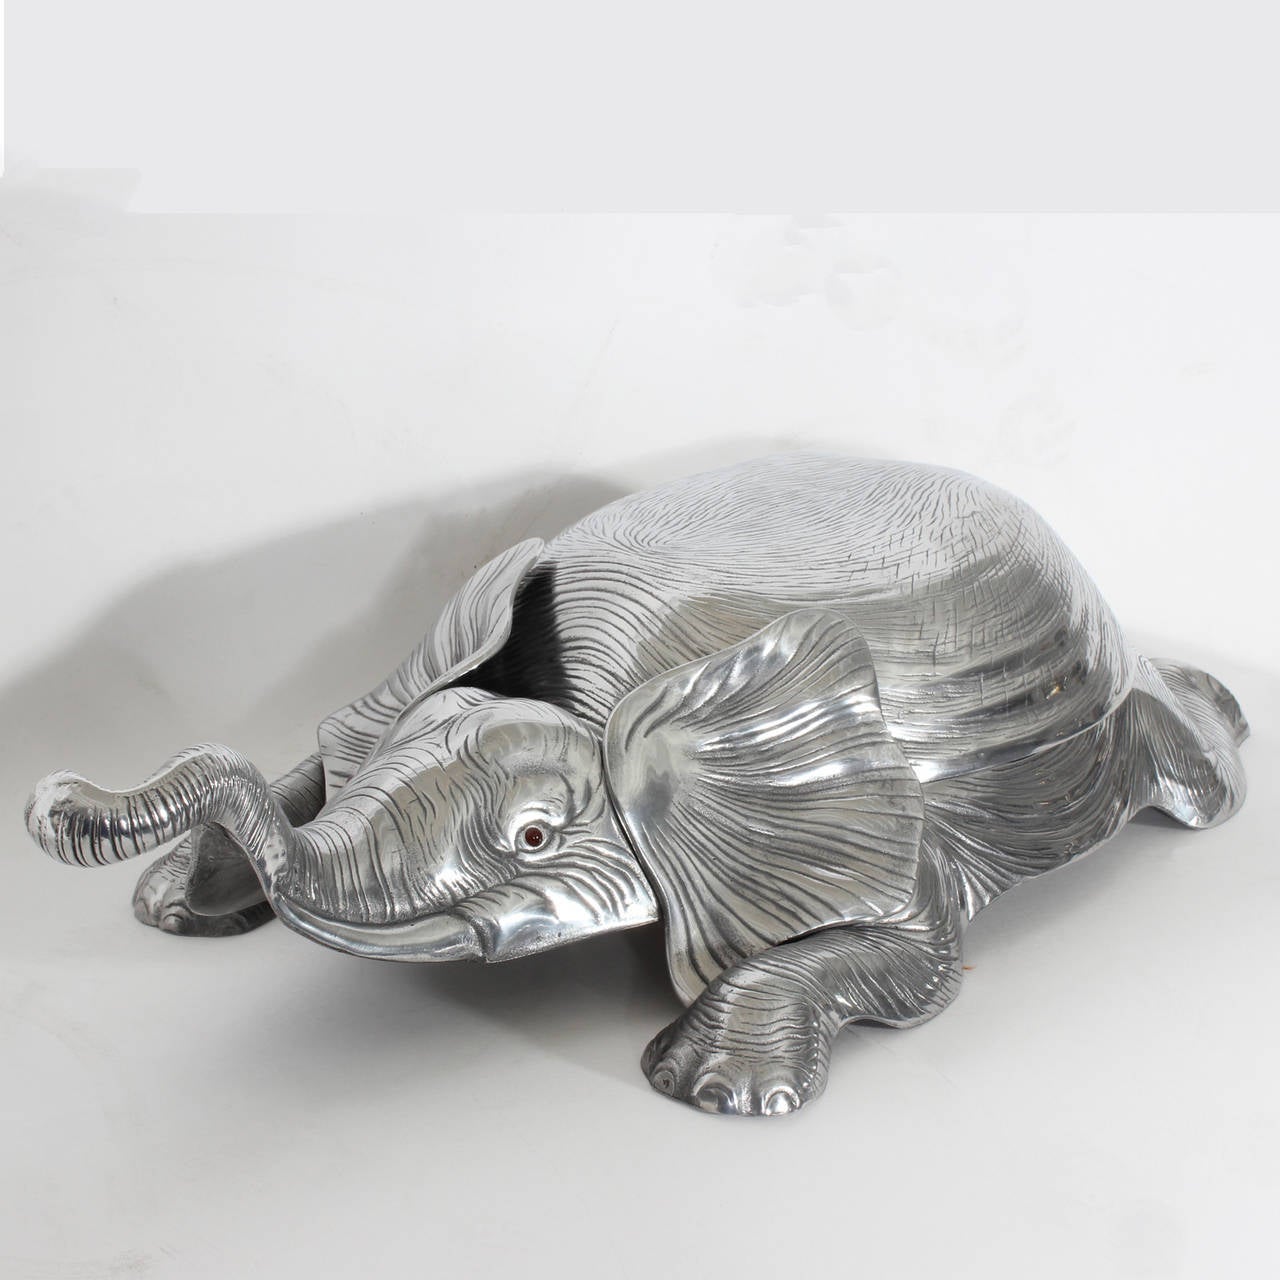 An amusing Arthur Court cast aluminum elephant, signed and dated 1979 with removable top, perfect for adding some humor to your dining table, crisp casting and realistic wisdom in its eyes. Very nicely polished.